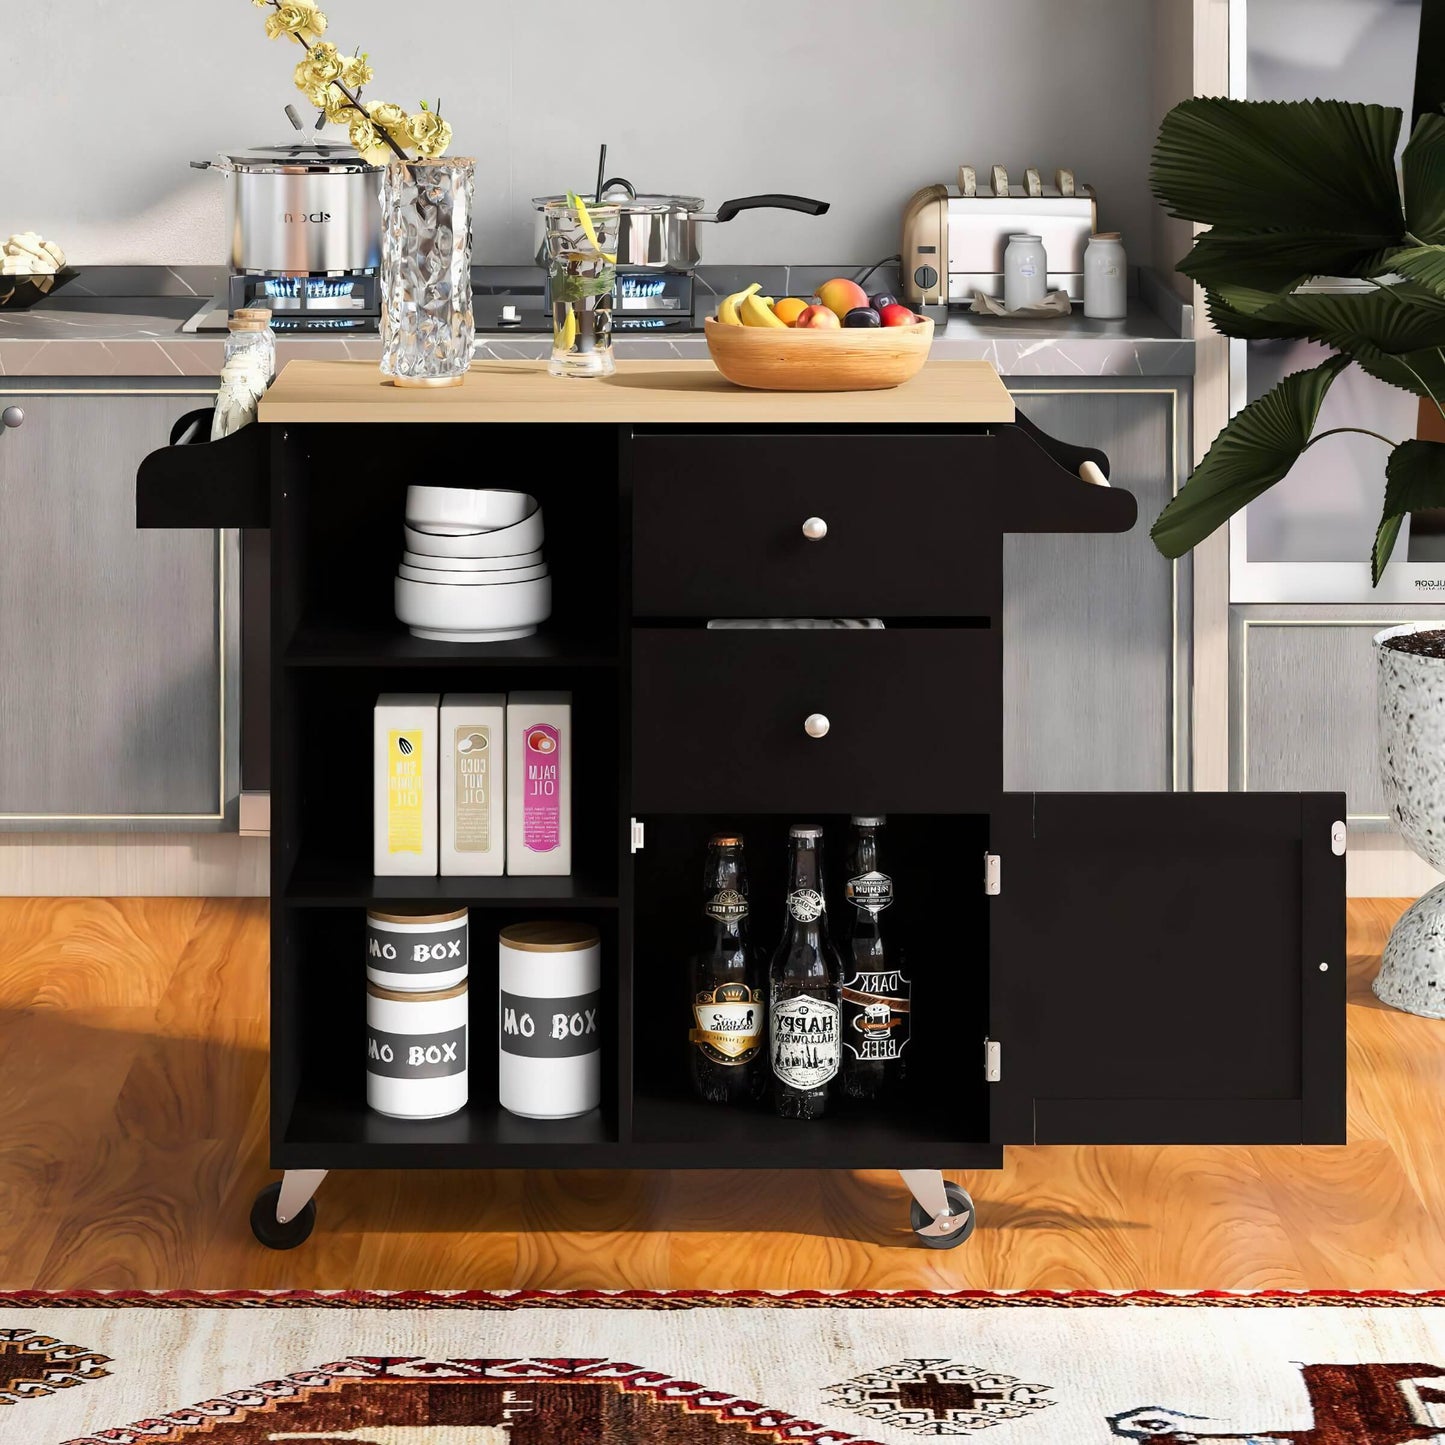 Convenient WETA Kitchen Island Cart: Rolling Cart with Wheels, Storage, Spice Rack, and Towel Holder